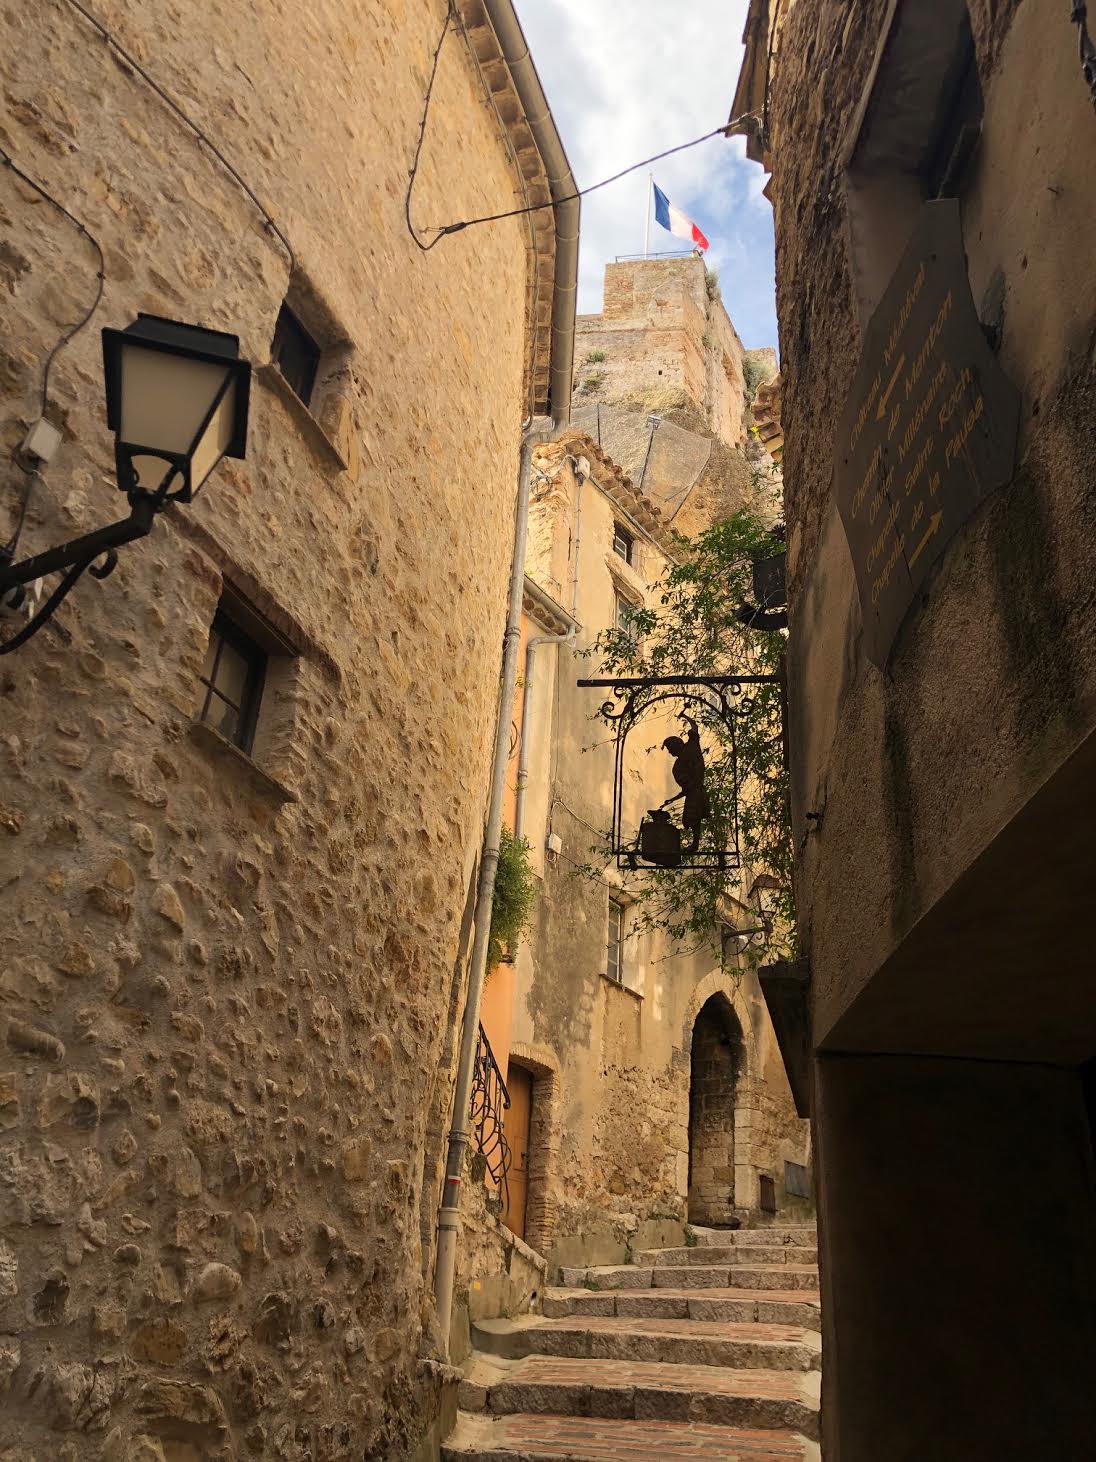 A medieval castle in Roquebrune, France & a few snaps from Monaco